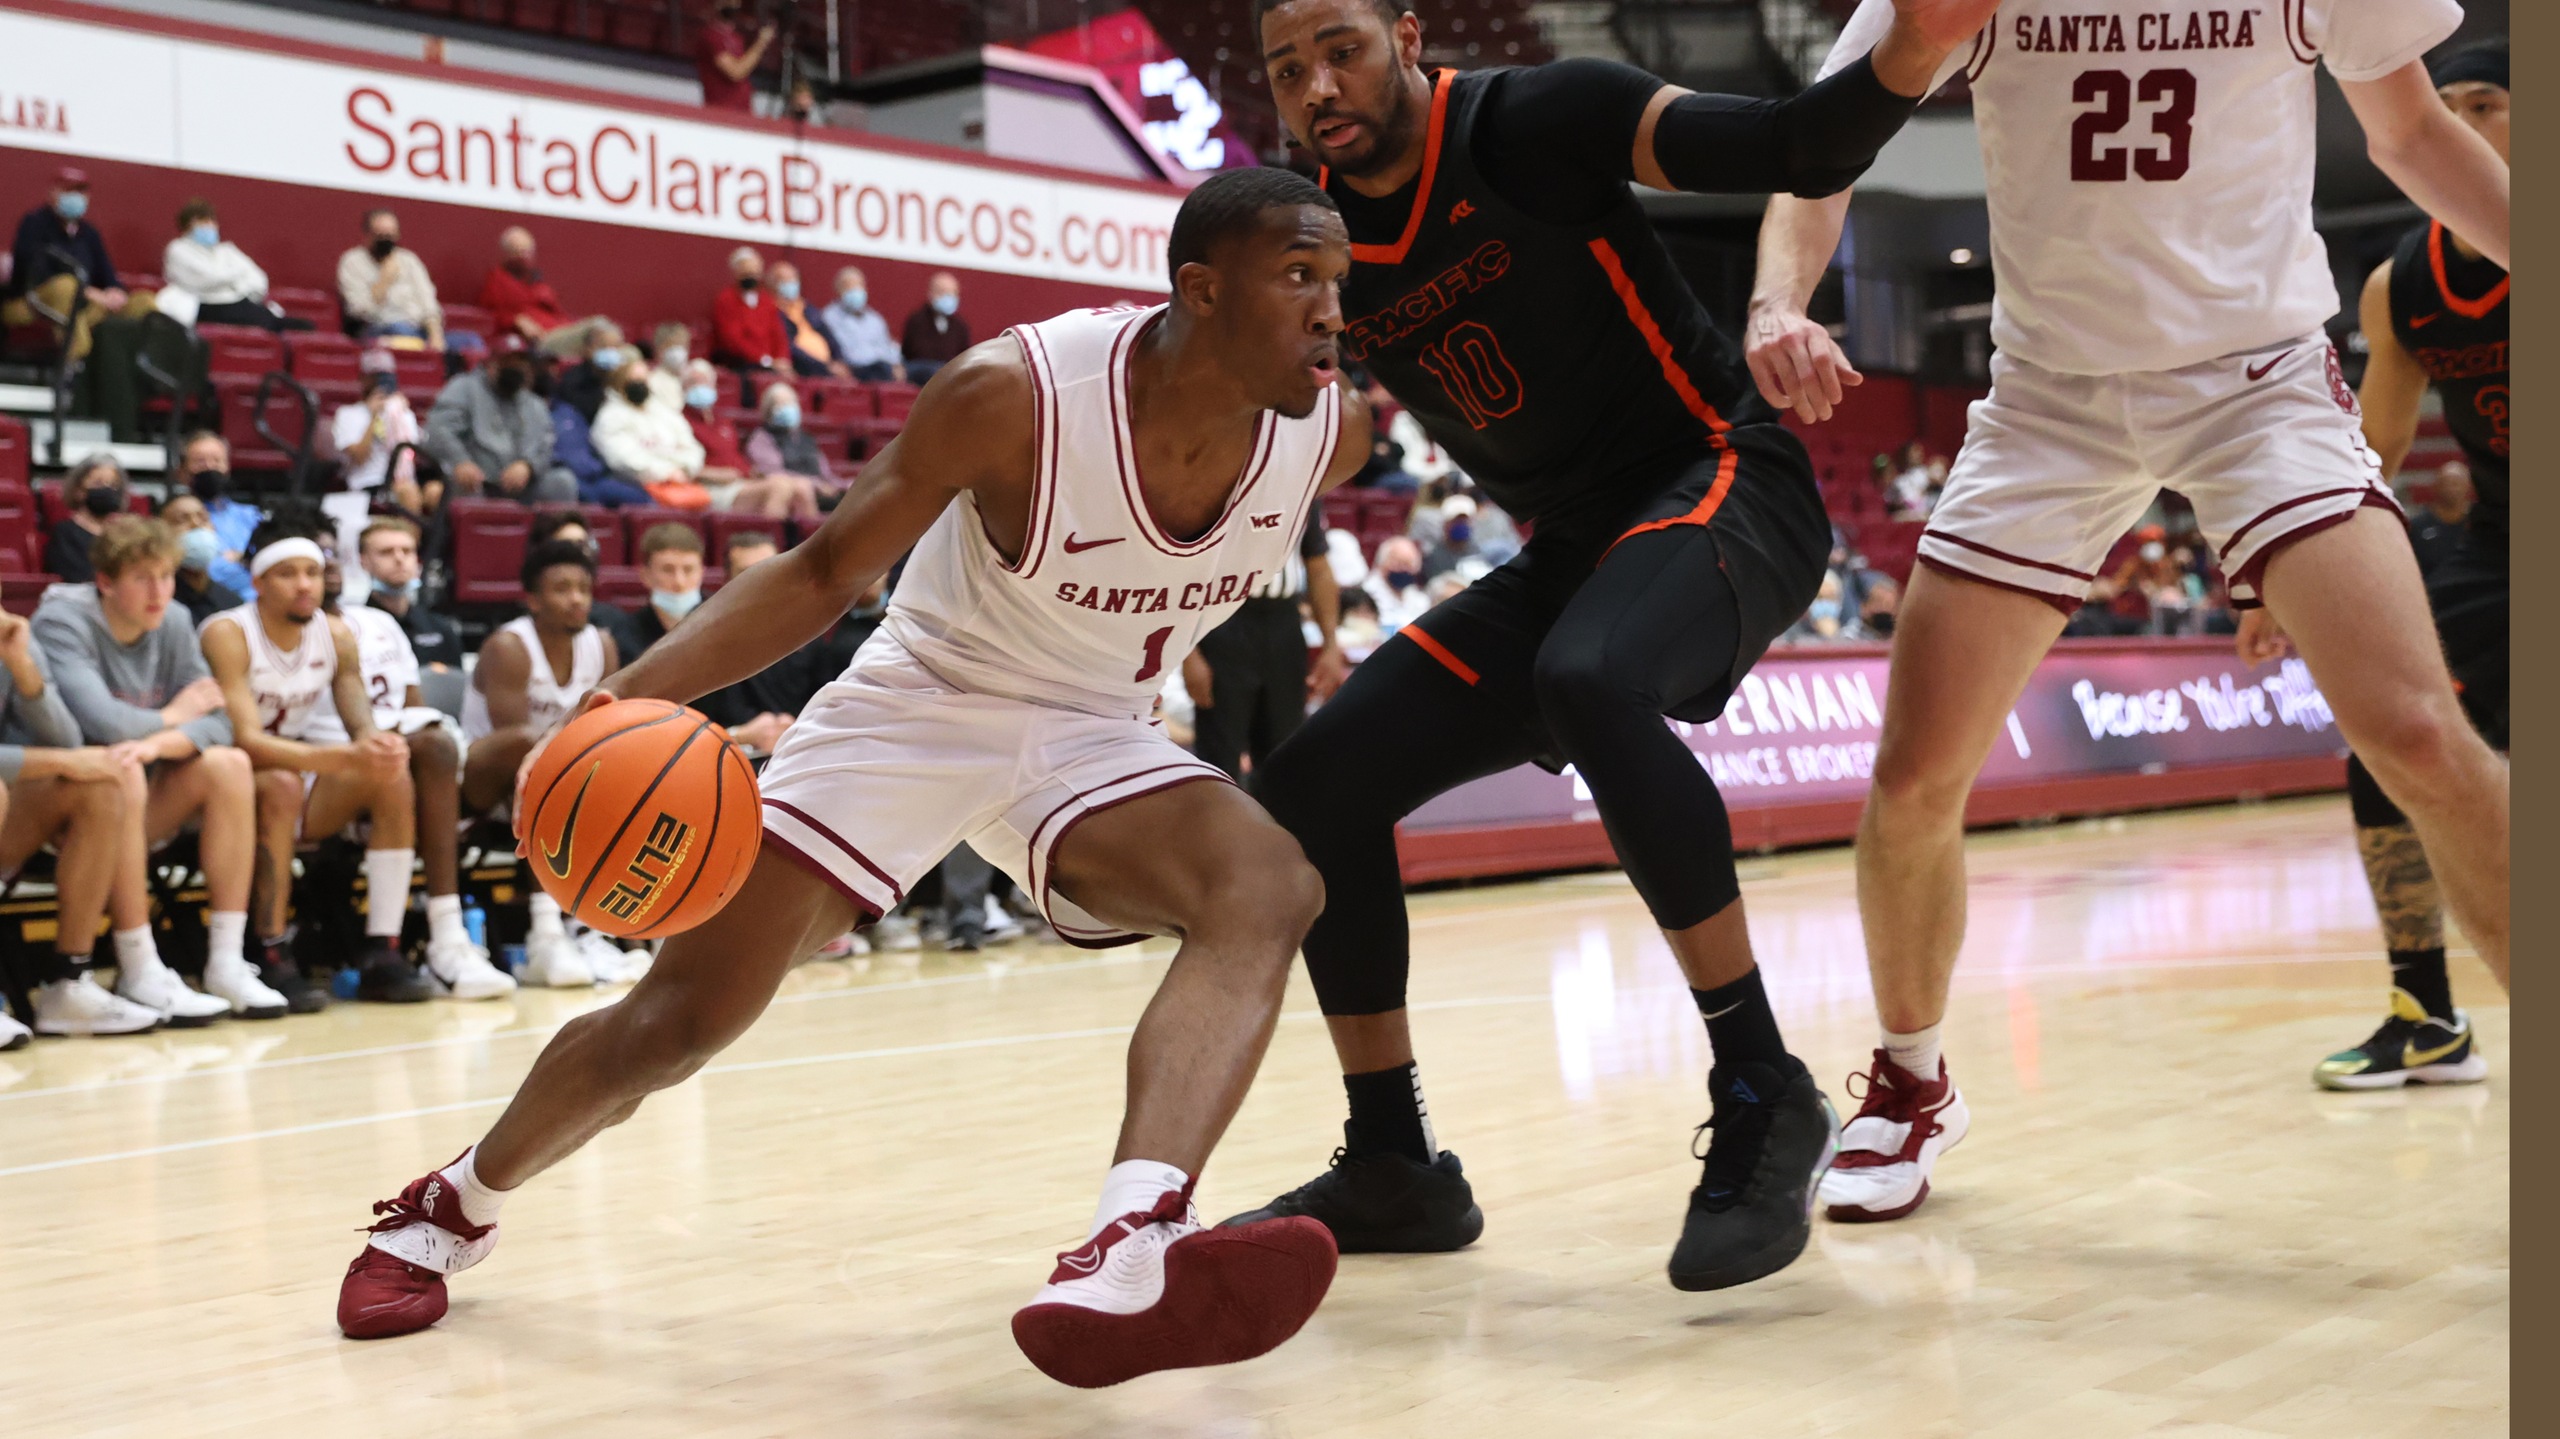 Big Second Half Propels Men's Basketball To 81-59 Victory Over Pacific